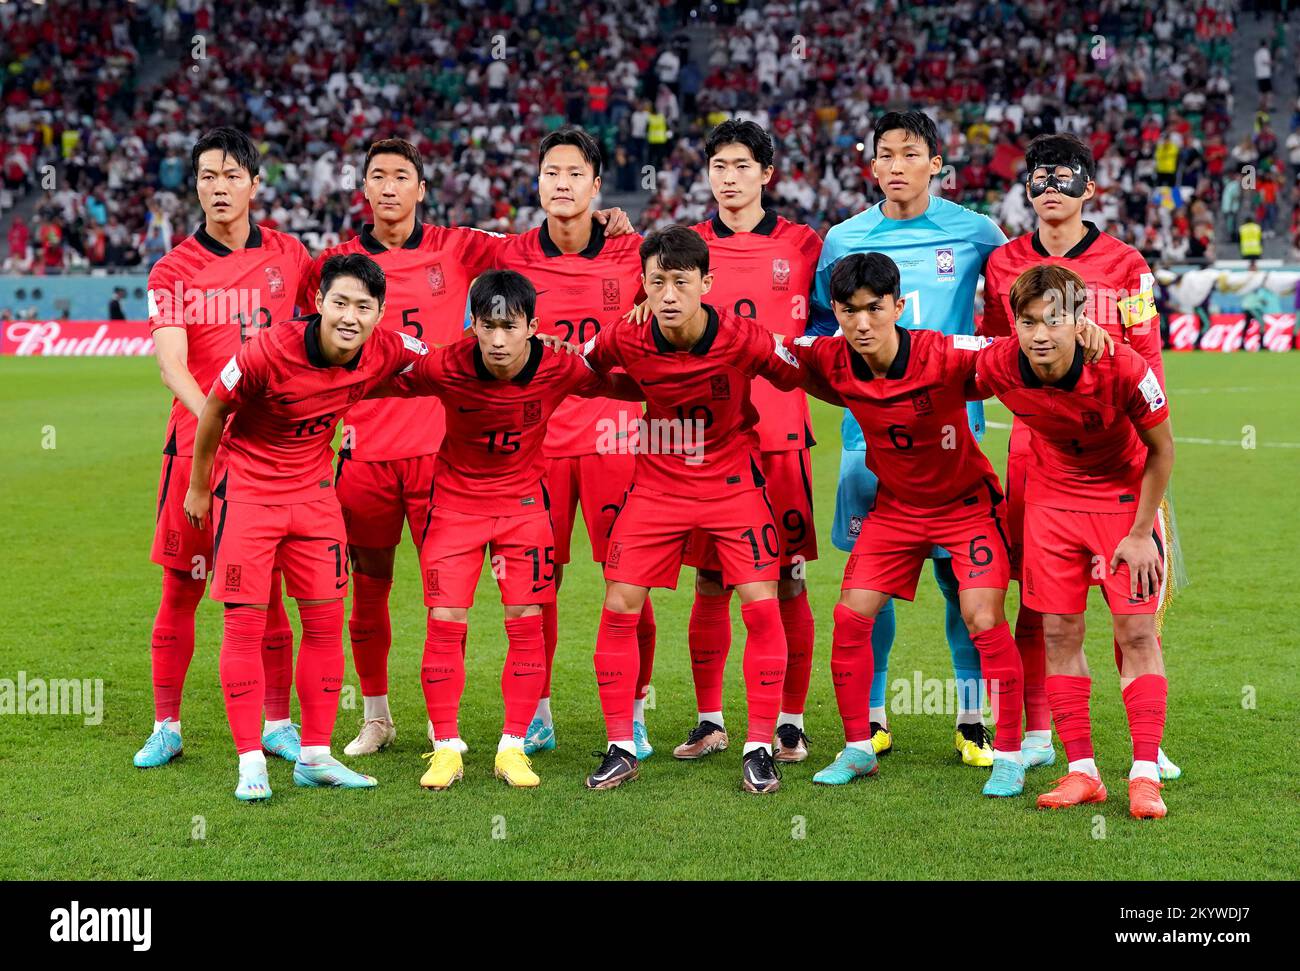 South Korea's Kim Young-gwon (top left), Jung Woo-young, Kwon Kyung-won, Cho Gue-sung, goalkeeper Kim Seung-gyu, Son Heung-min, Lee Kang-in, Kim Moon-hwan, Lee Jae-sung, Hwang In-beom and Kim Jin-su line up on the pitch for a team photo ahead of the FIFA World Cup Group H match at the Education City Stadium in Al-Rayyan, Qatar. Picture date: Friday December 2, 2022. Stock Photo